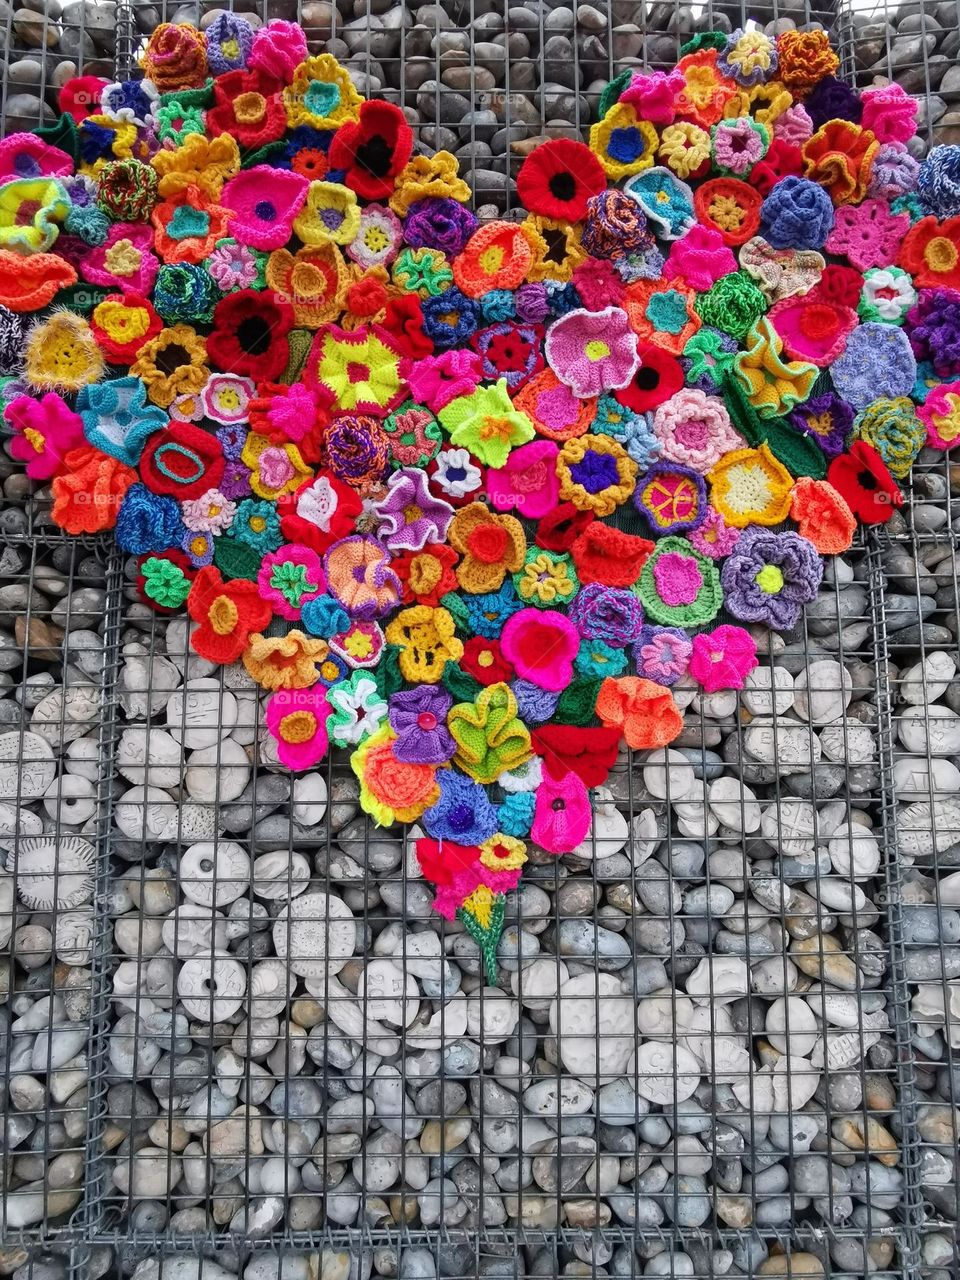 Art object. Knitted flowers and heart. Lots of stones.